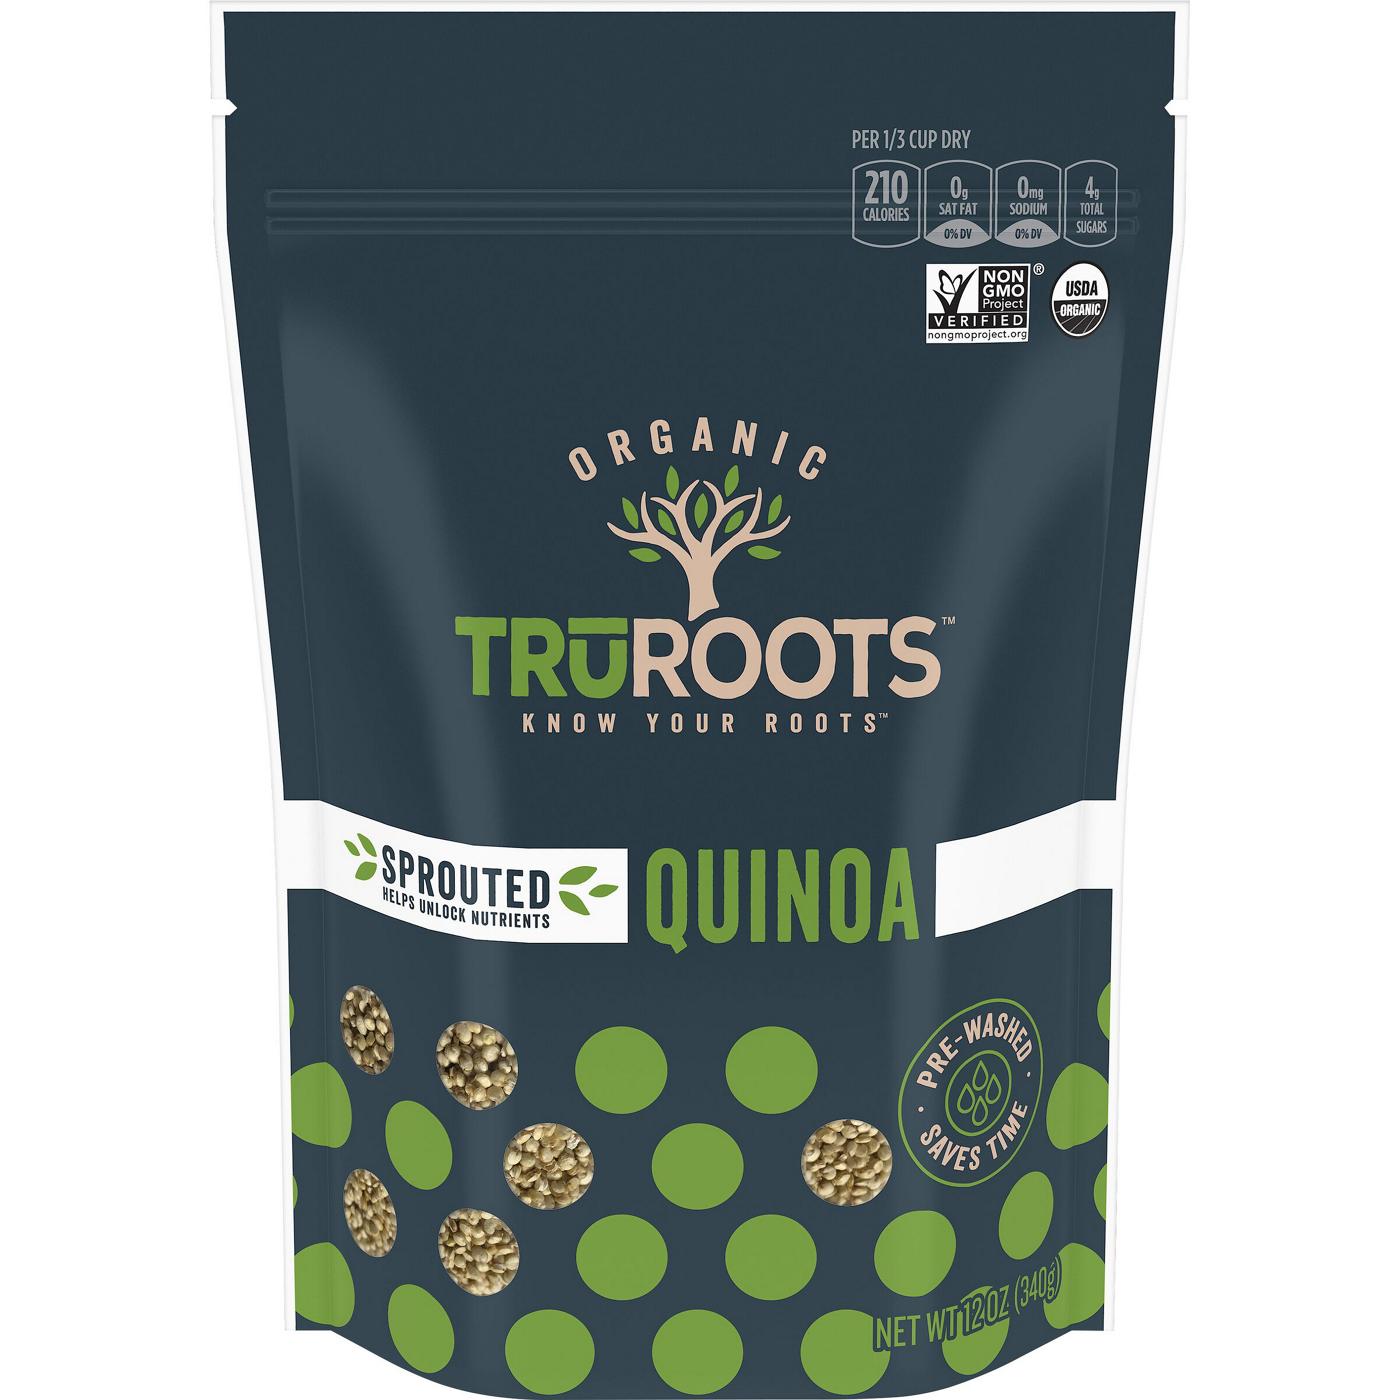 TruRoots Organic Whole Grain Sprouted Quinoa; image 1 of 3